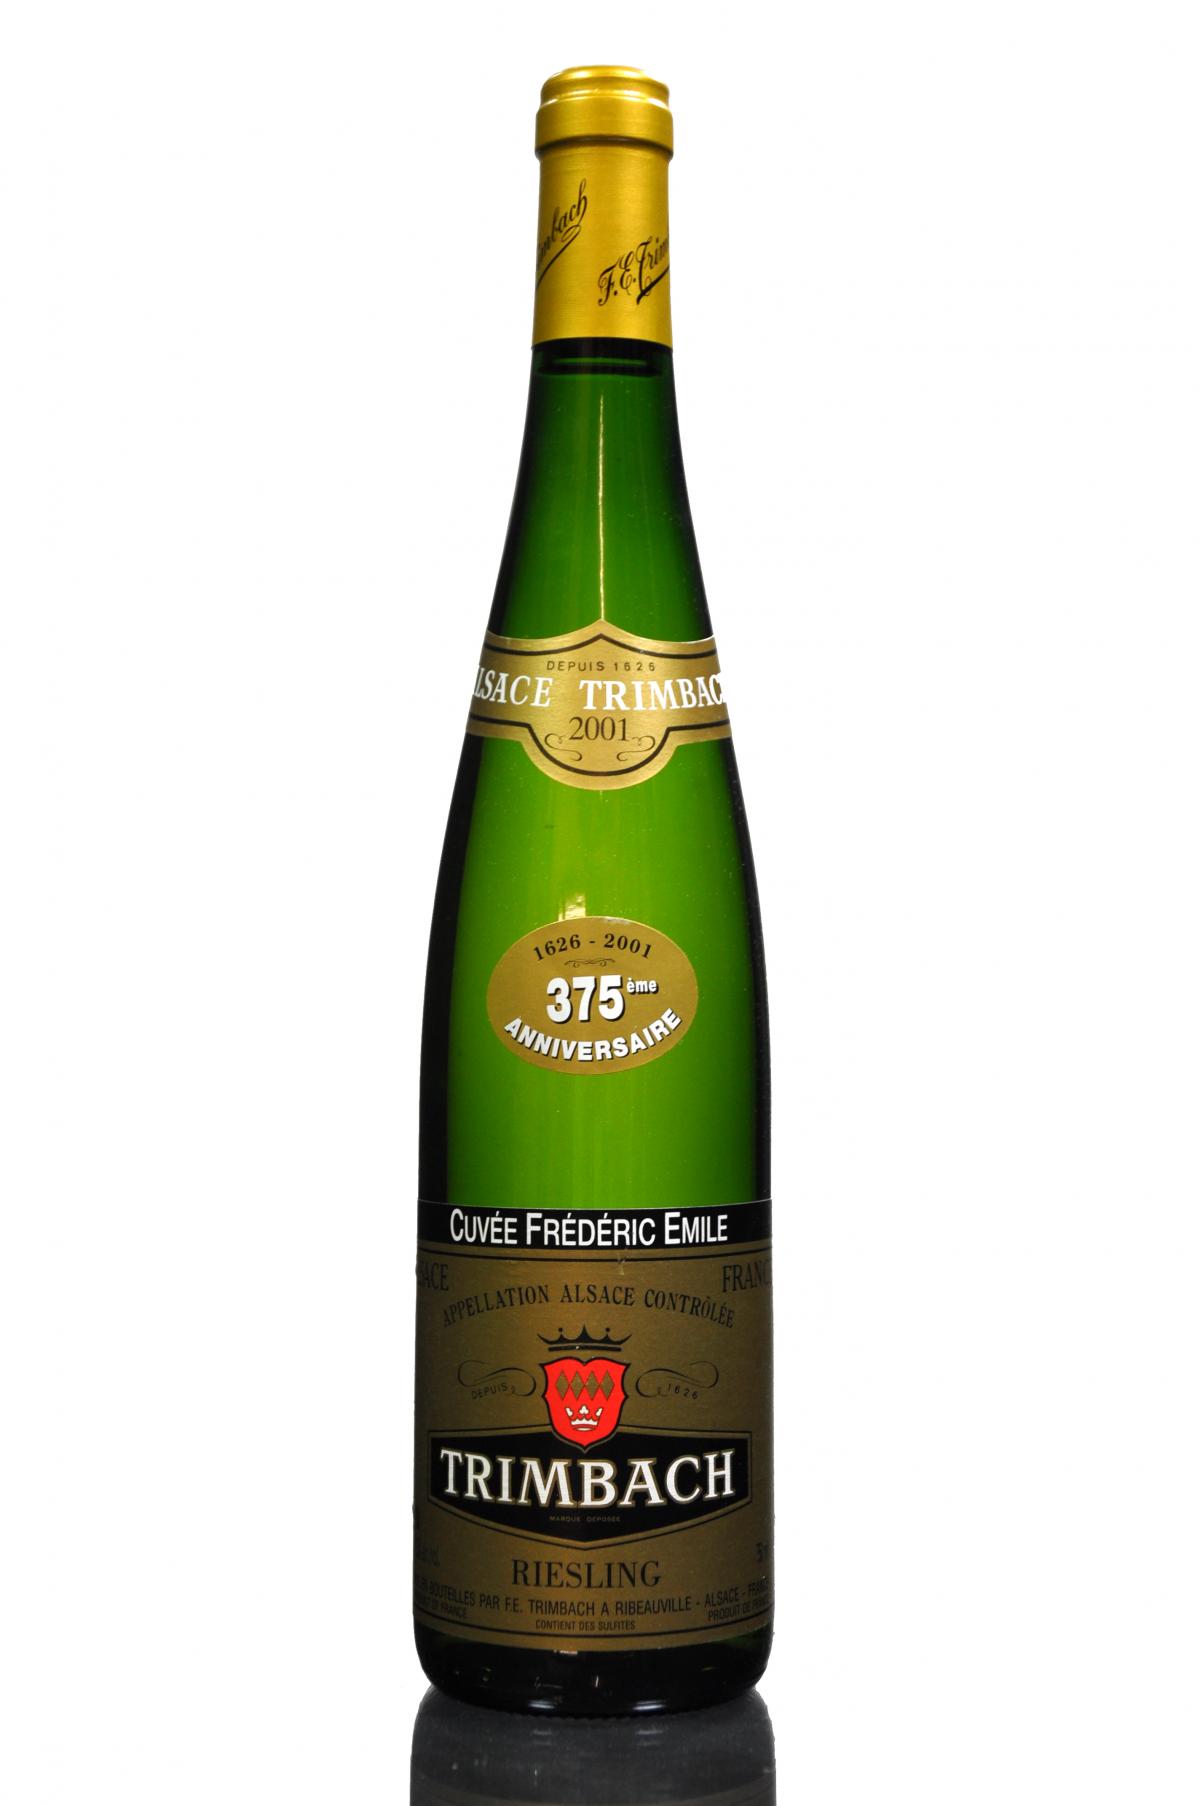 Trimbach Riesling 2001